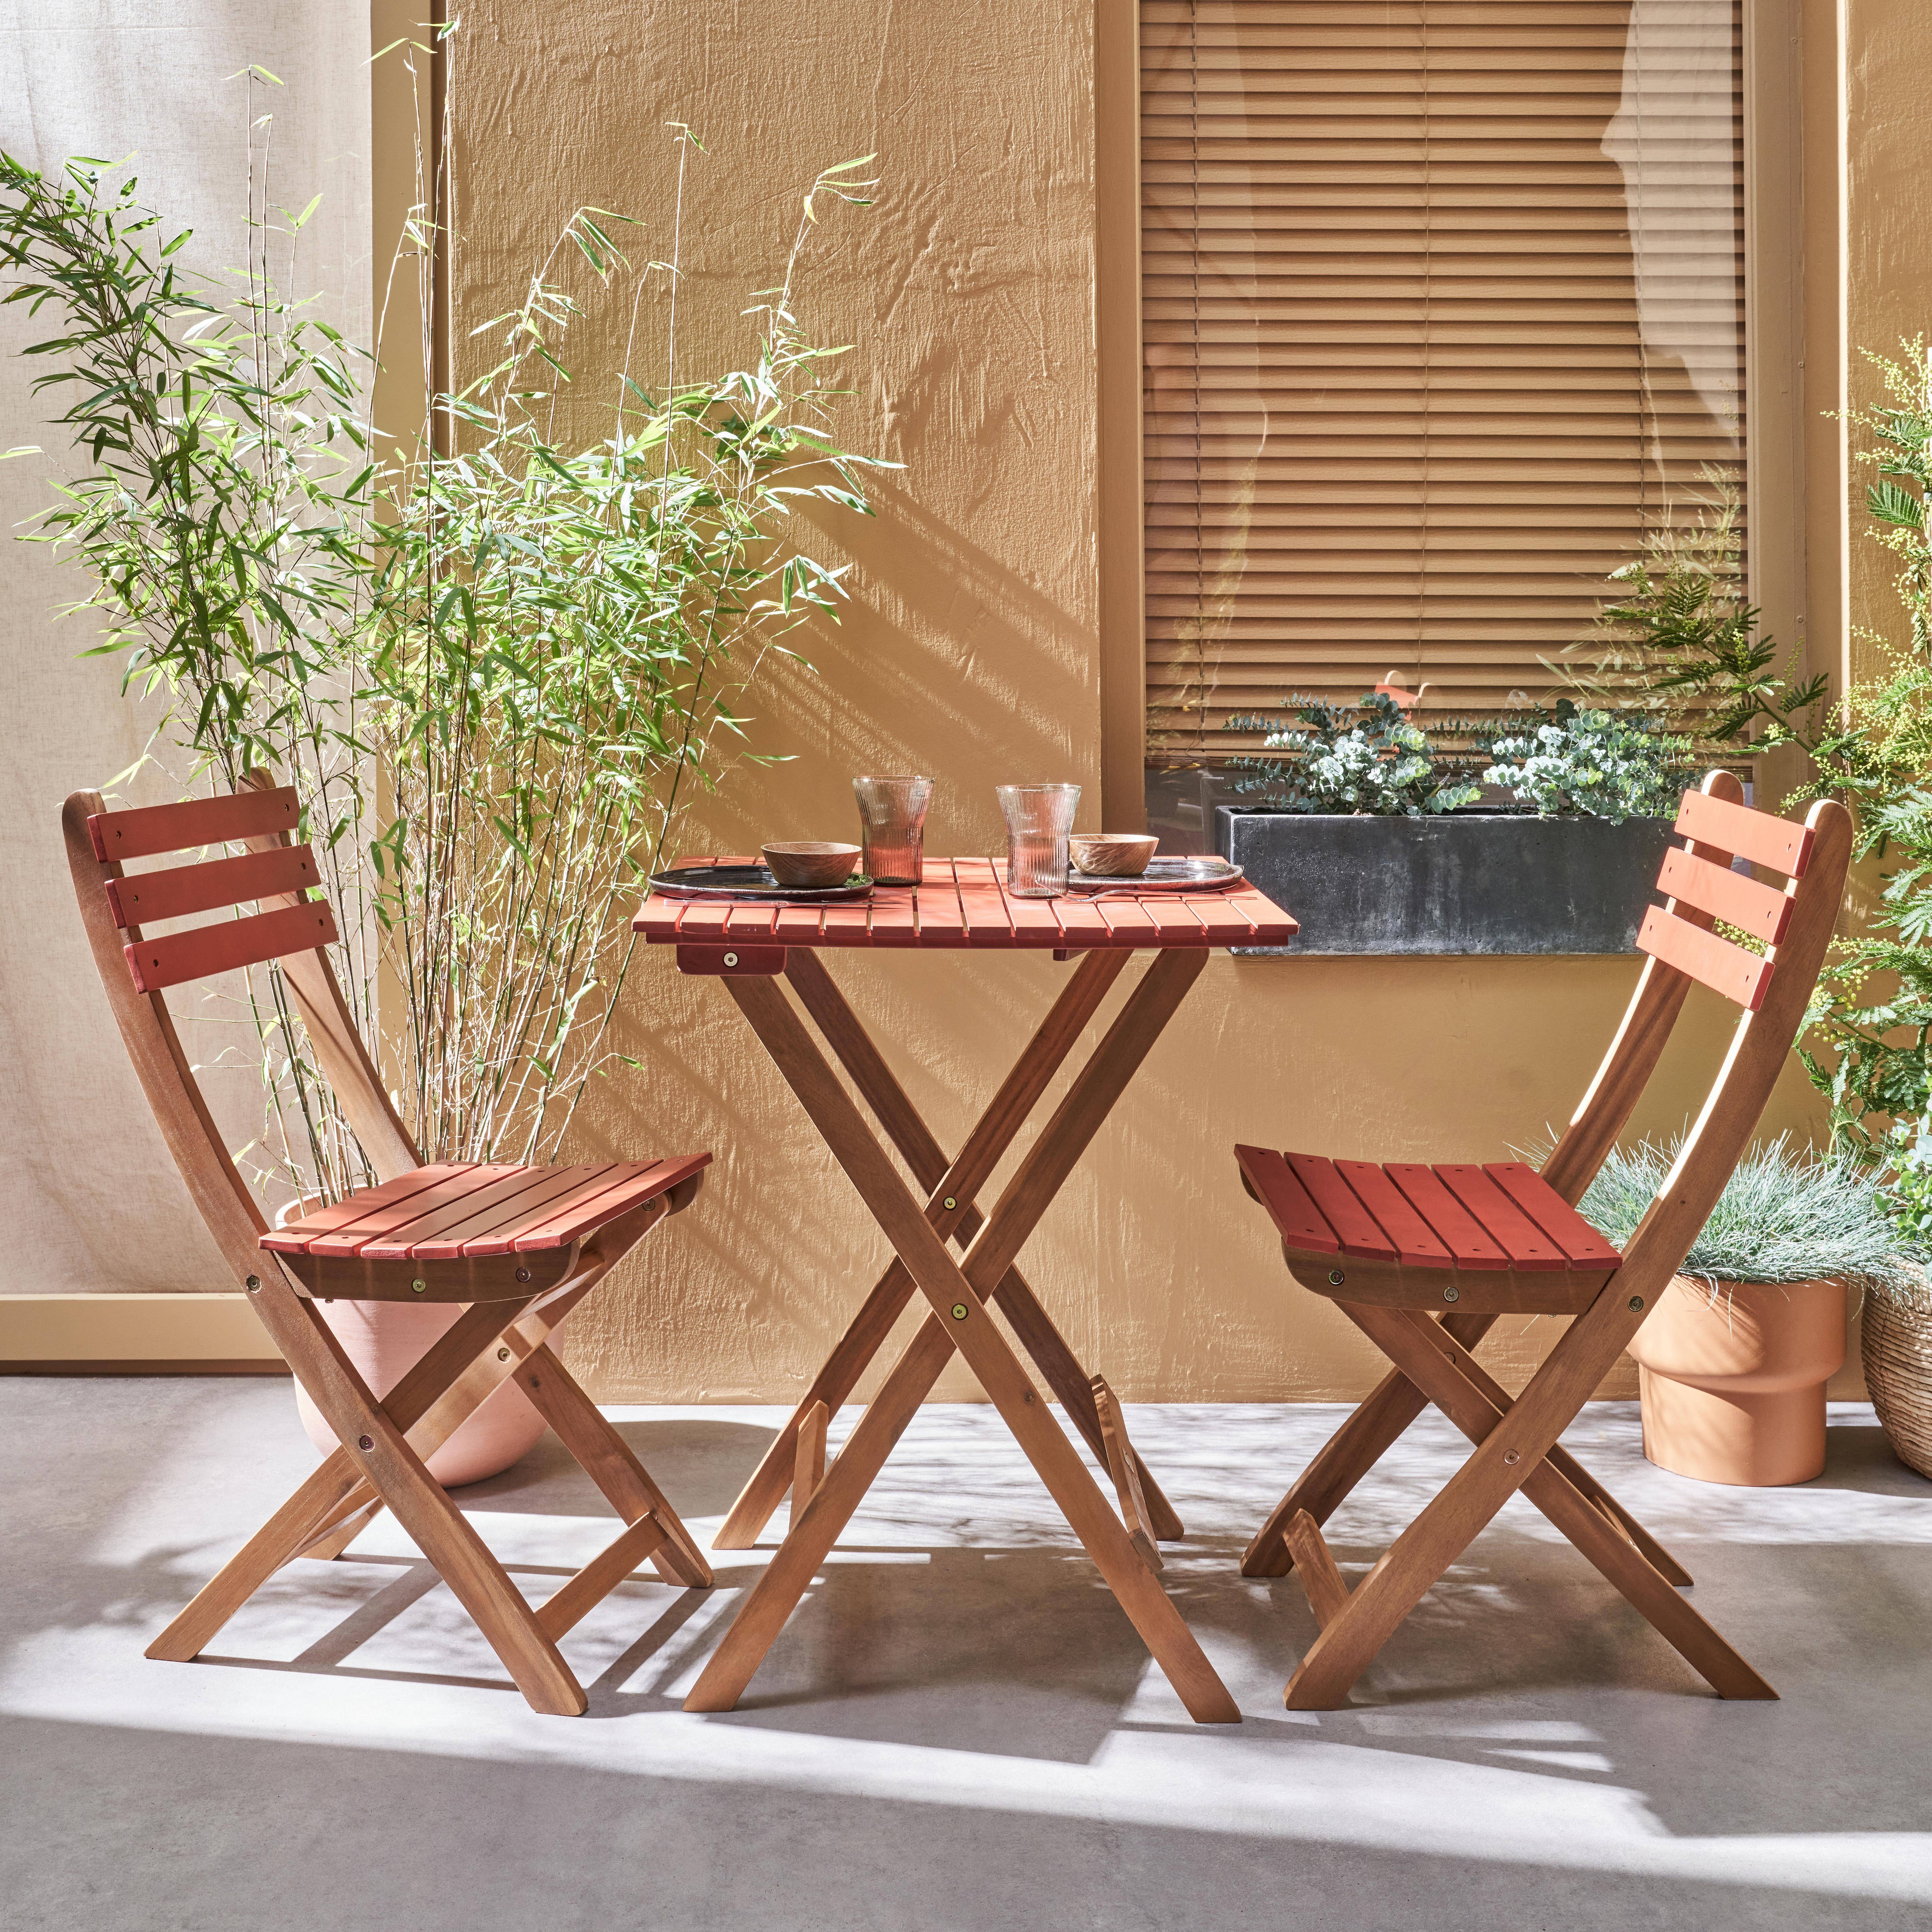 2-seater foldable wooden bistro garden table with chairs, 60x60cm - Barcelona - Terracotta,sweeek,Photo1